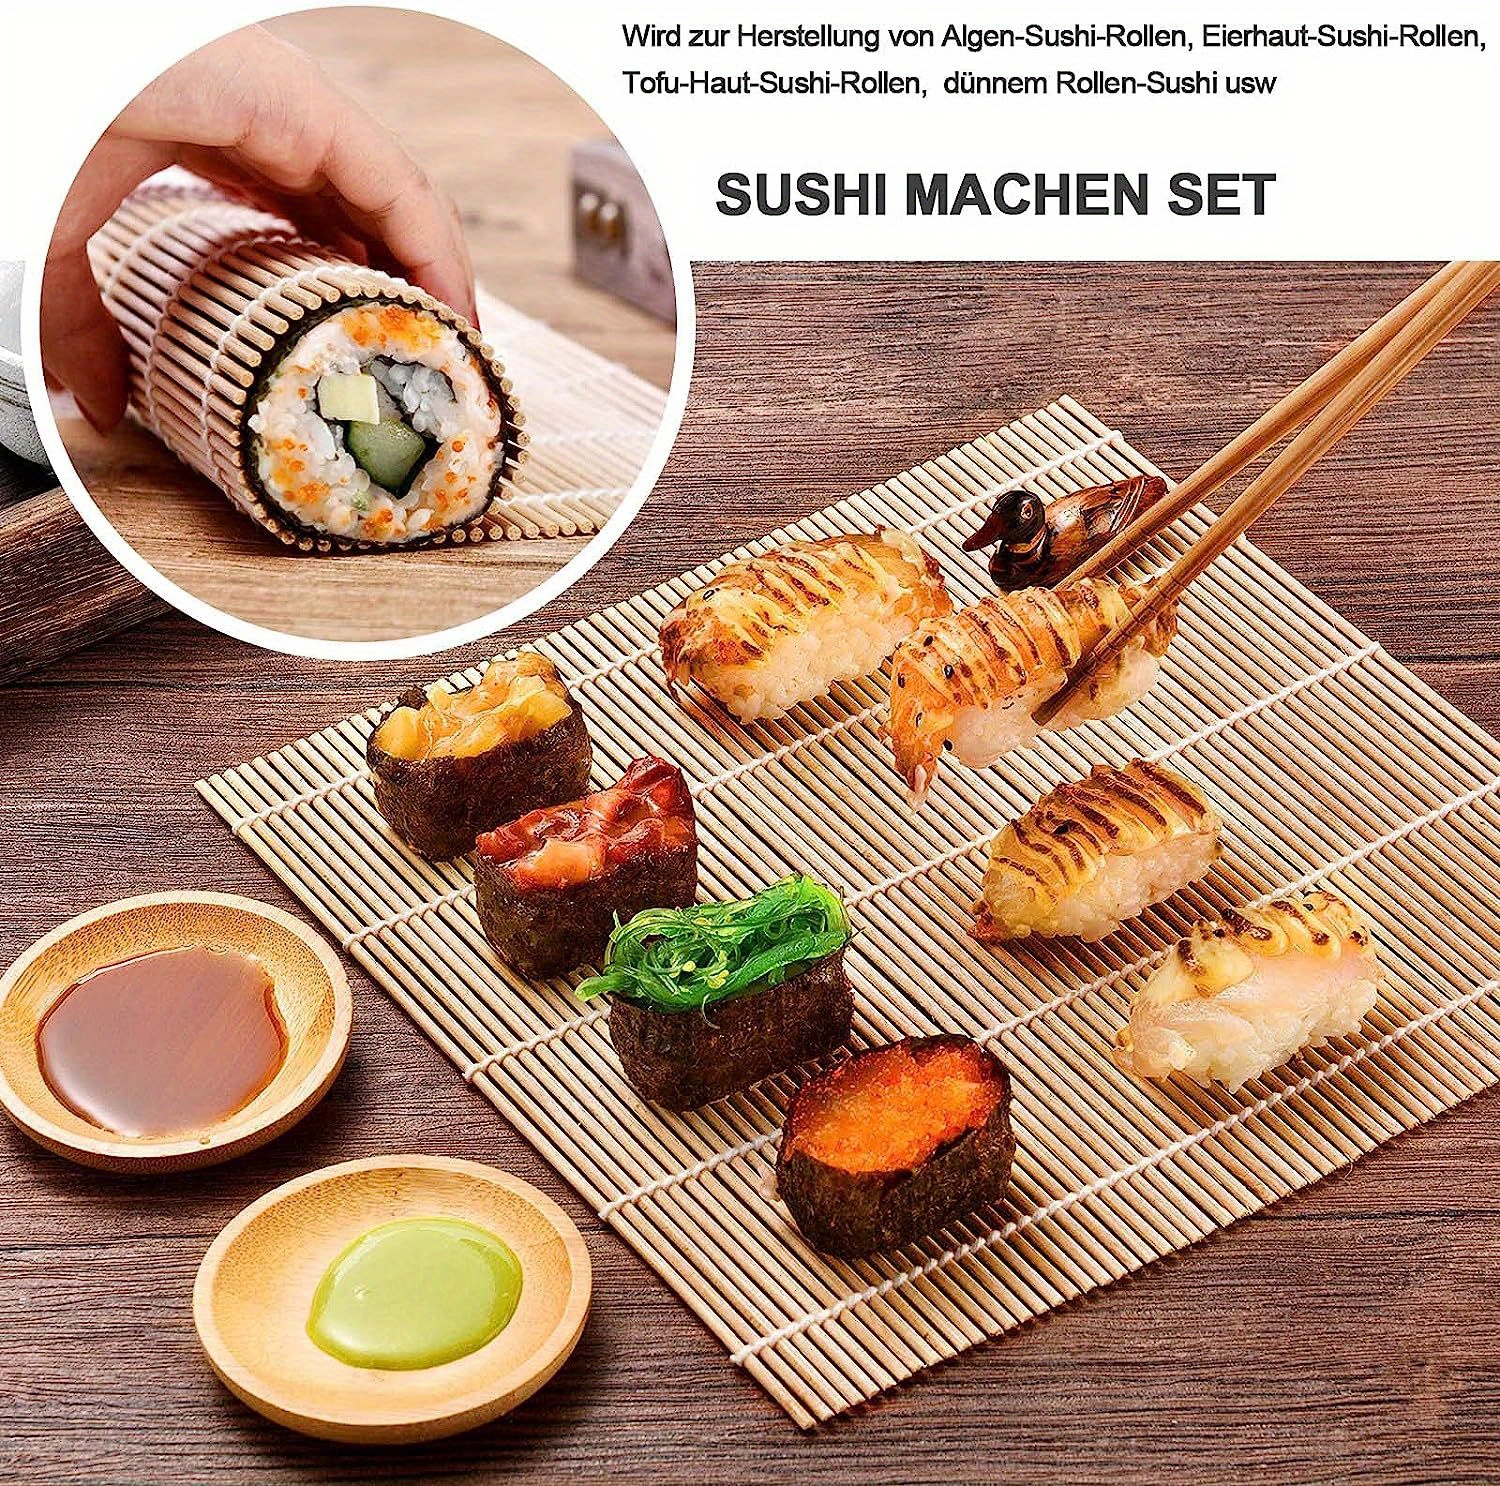 Japanese DIY Sushi Maker Kit Of Brown Rice Sushi And Roll Cooking